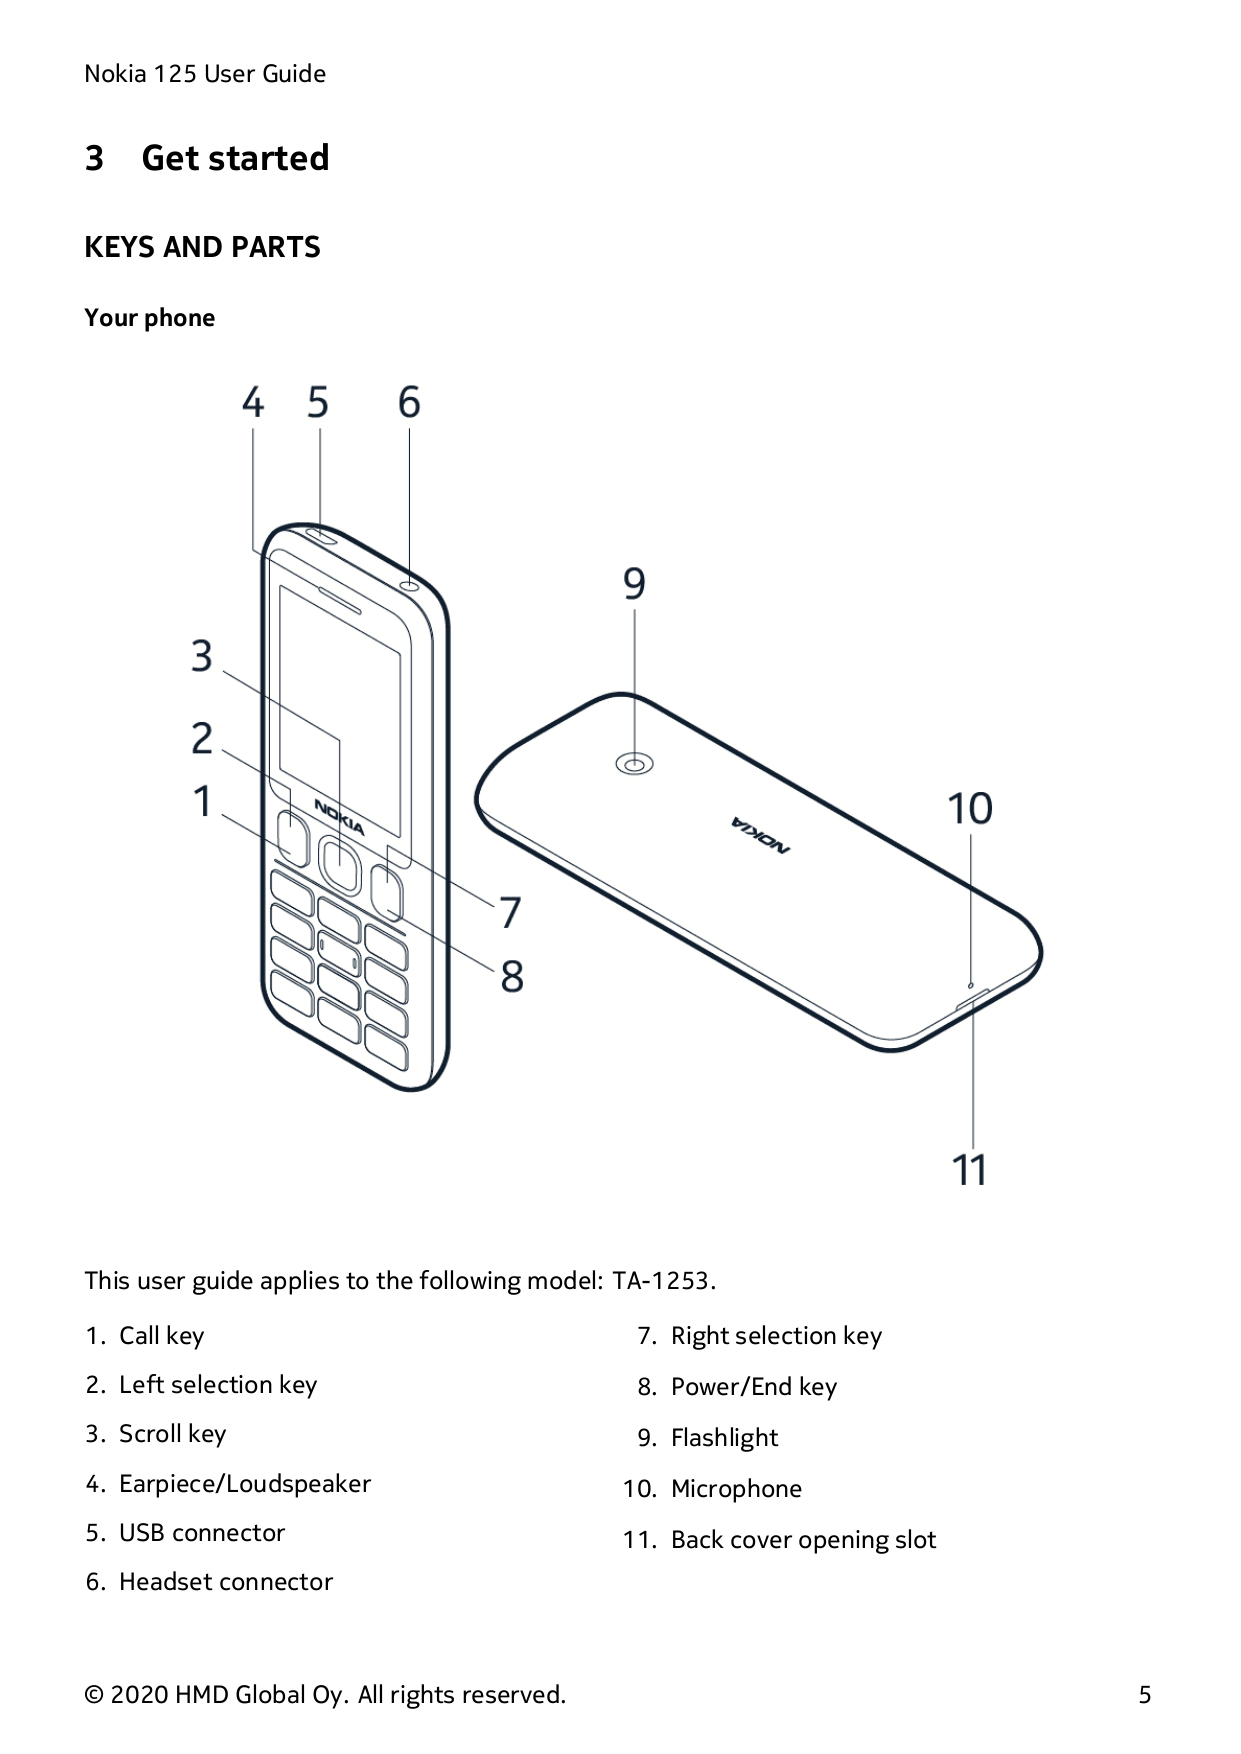 Nokia 125 User Guide3Get startedKEYS AND PARTSYour phoneThis user guide applies to the following model: TA-1253.1. Call key7. Ri